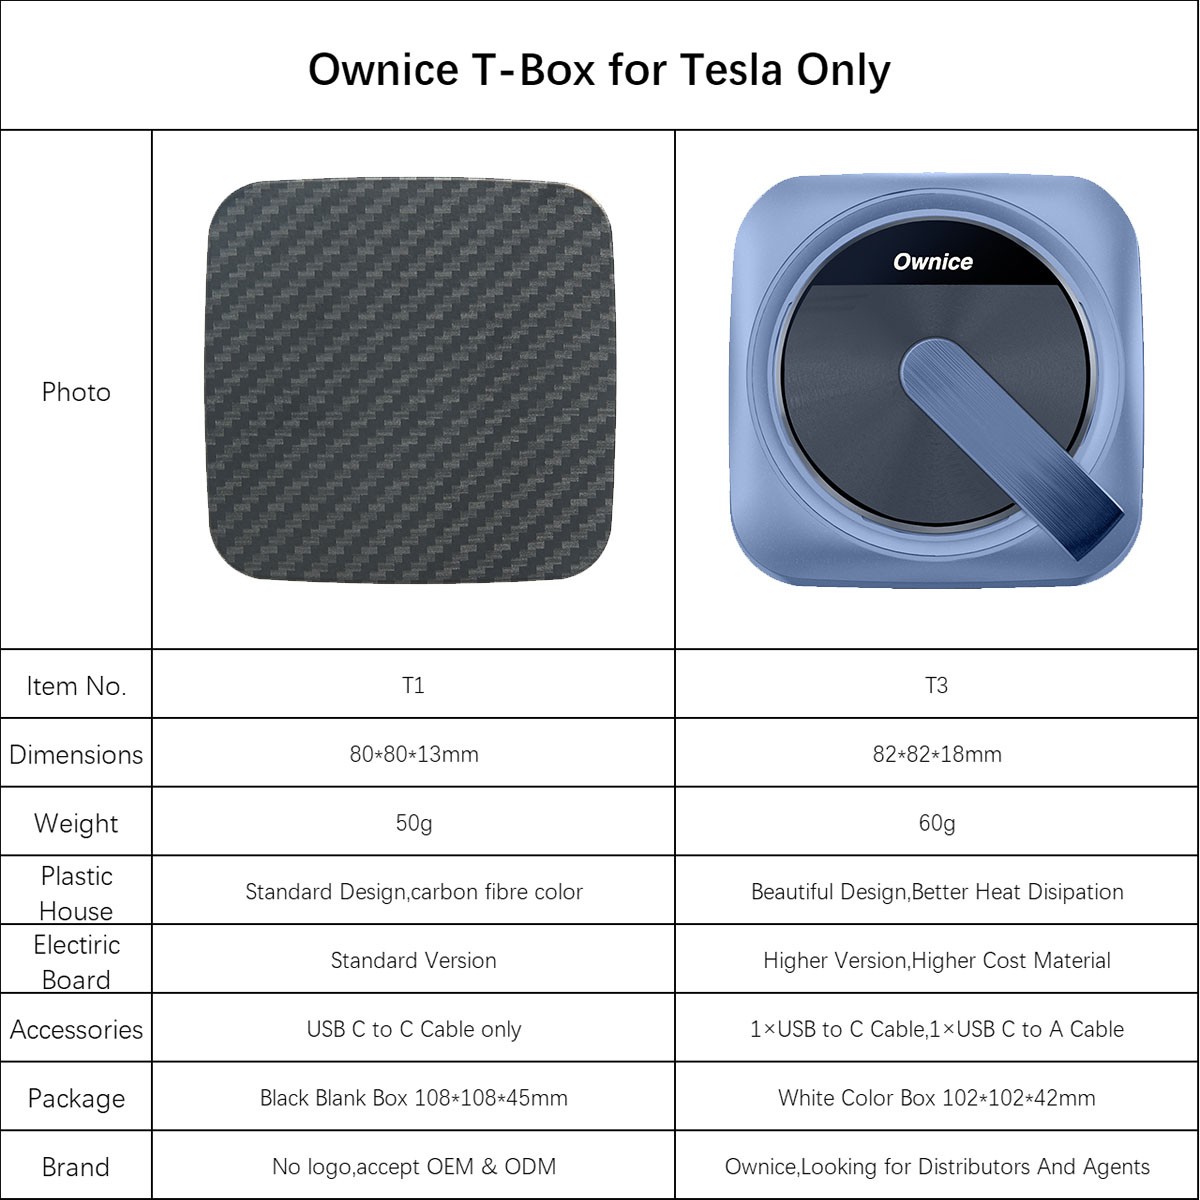 Ownice T1 Wireless Auto Ai Box for Tesla, Dual WiFi, Support CarPlay / AirPlay / Android Auto / MiraCast - Black